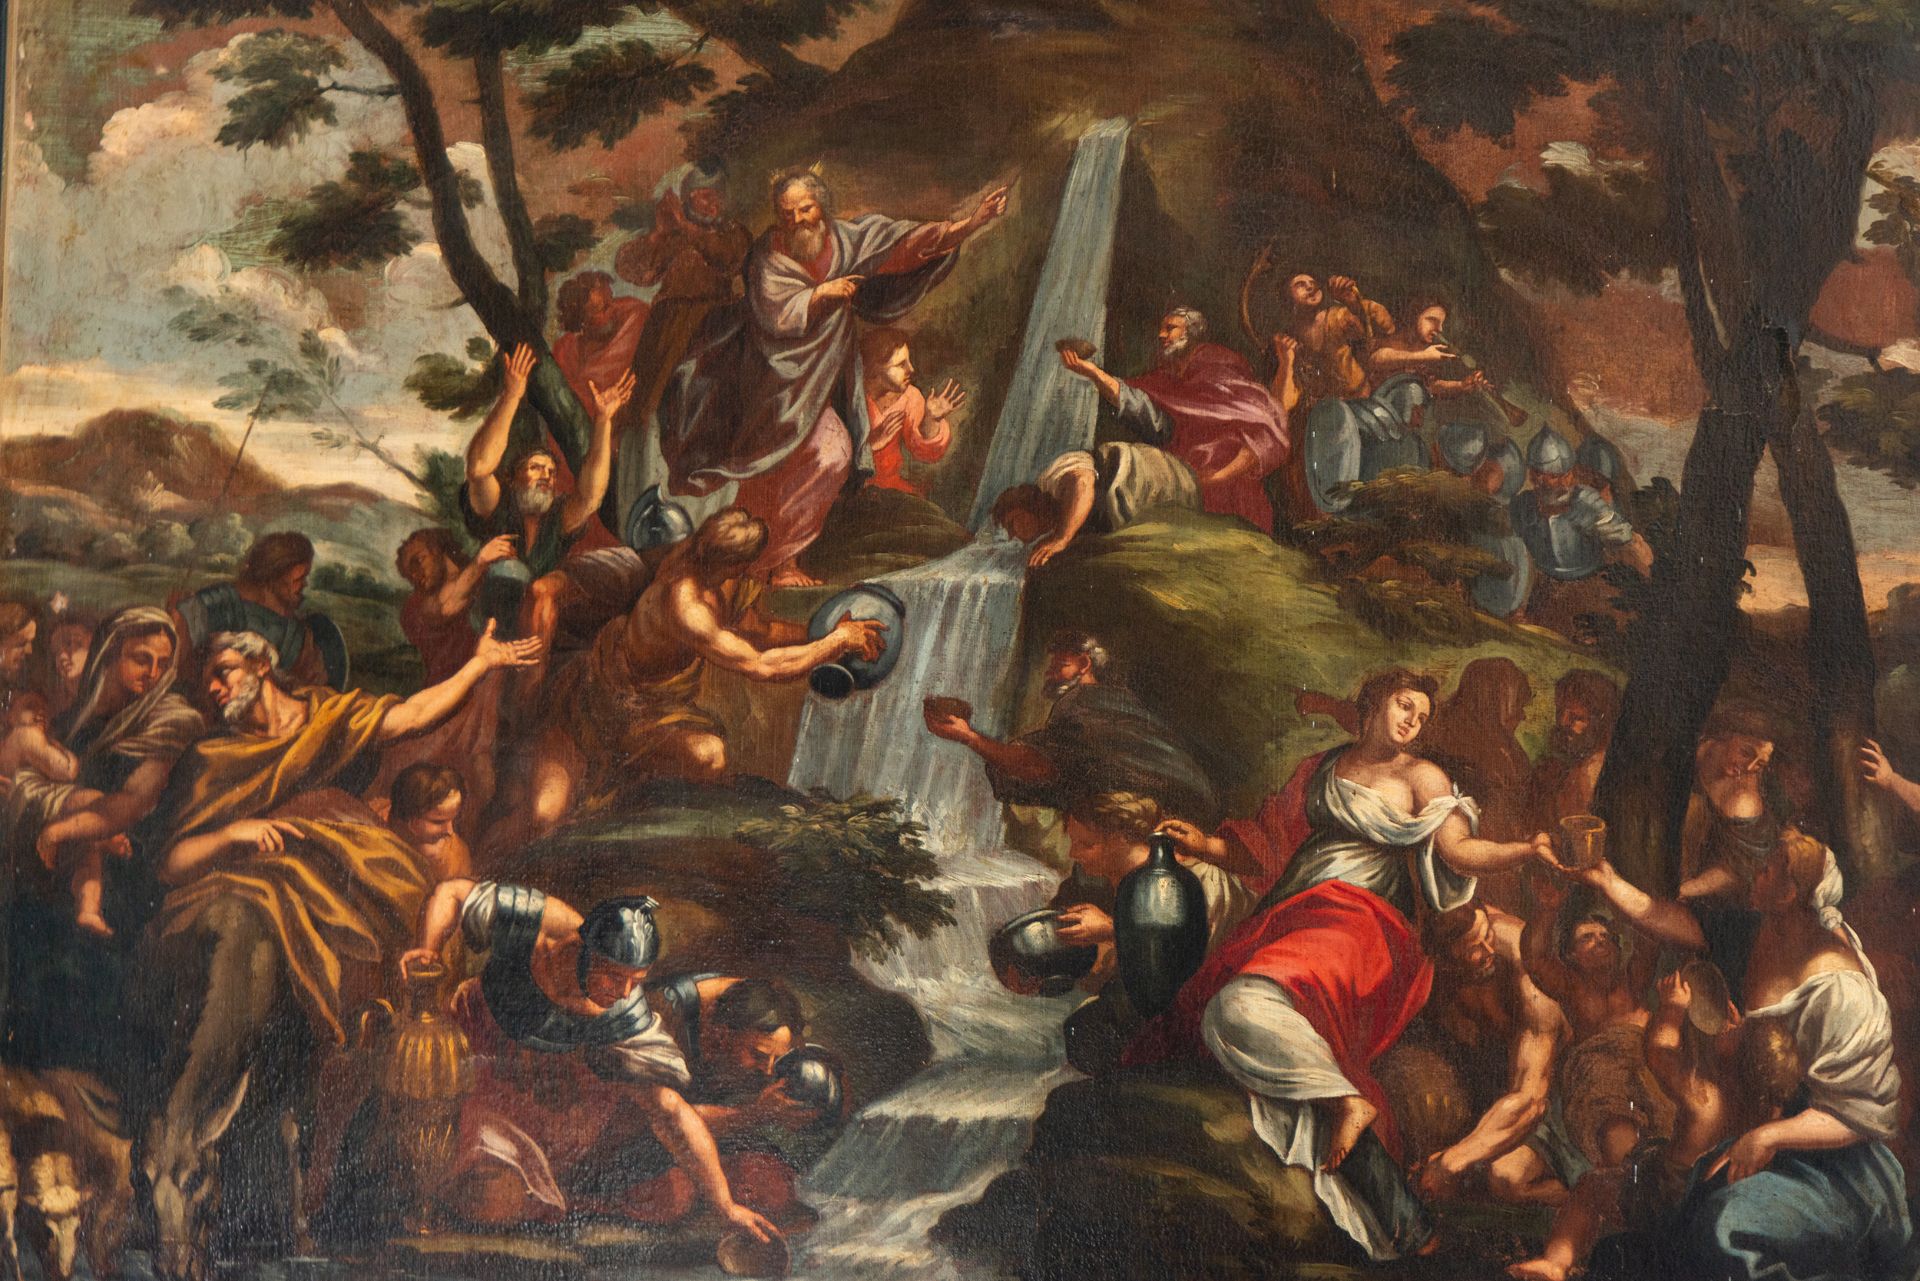 Elysium purifying the corrupt Waters, Italian school of the 17th century - Image 2 of 7